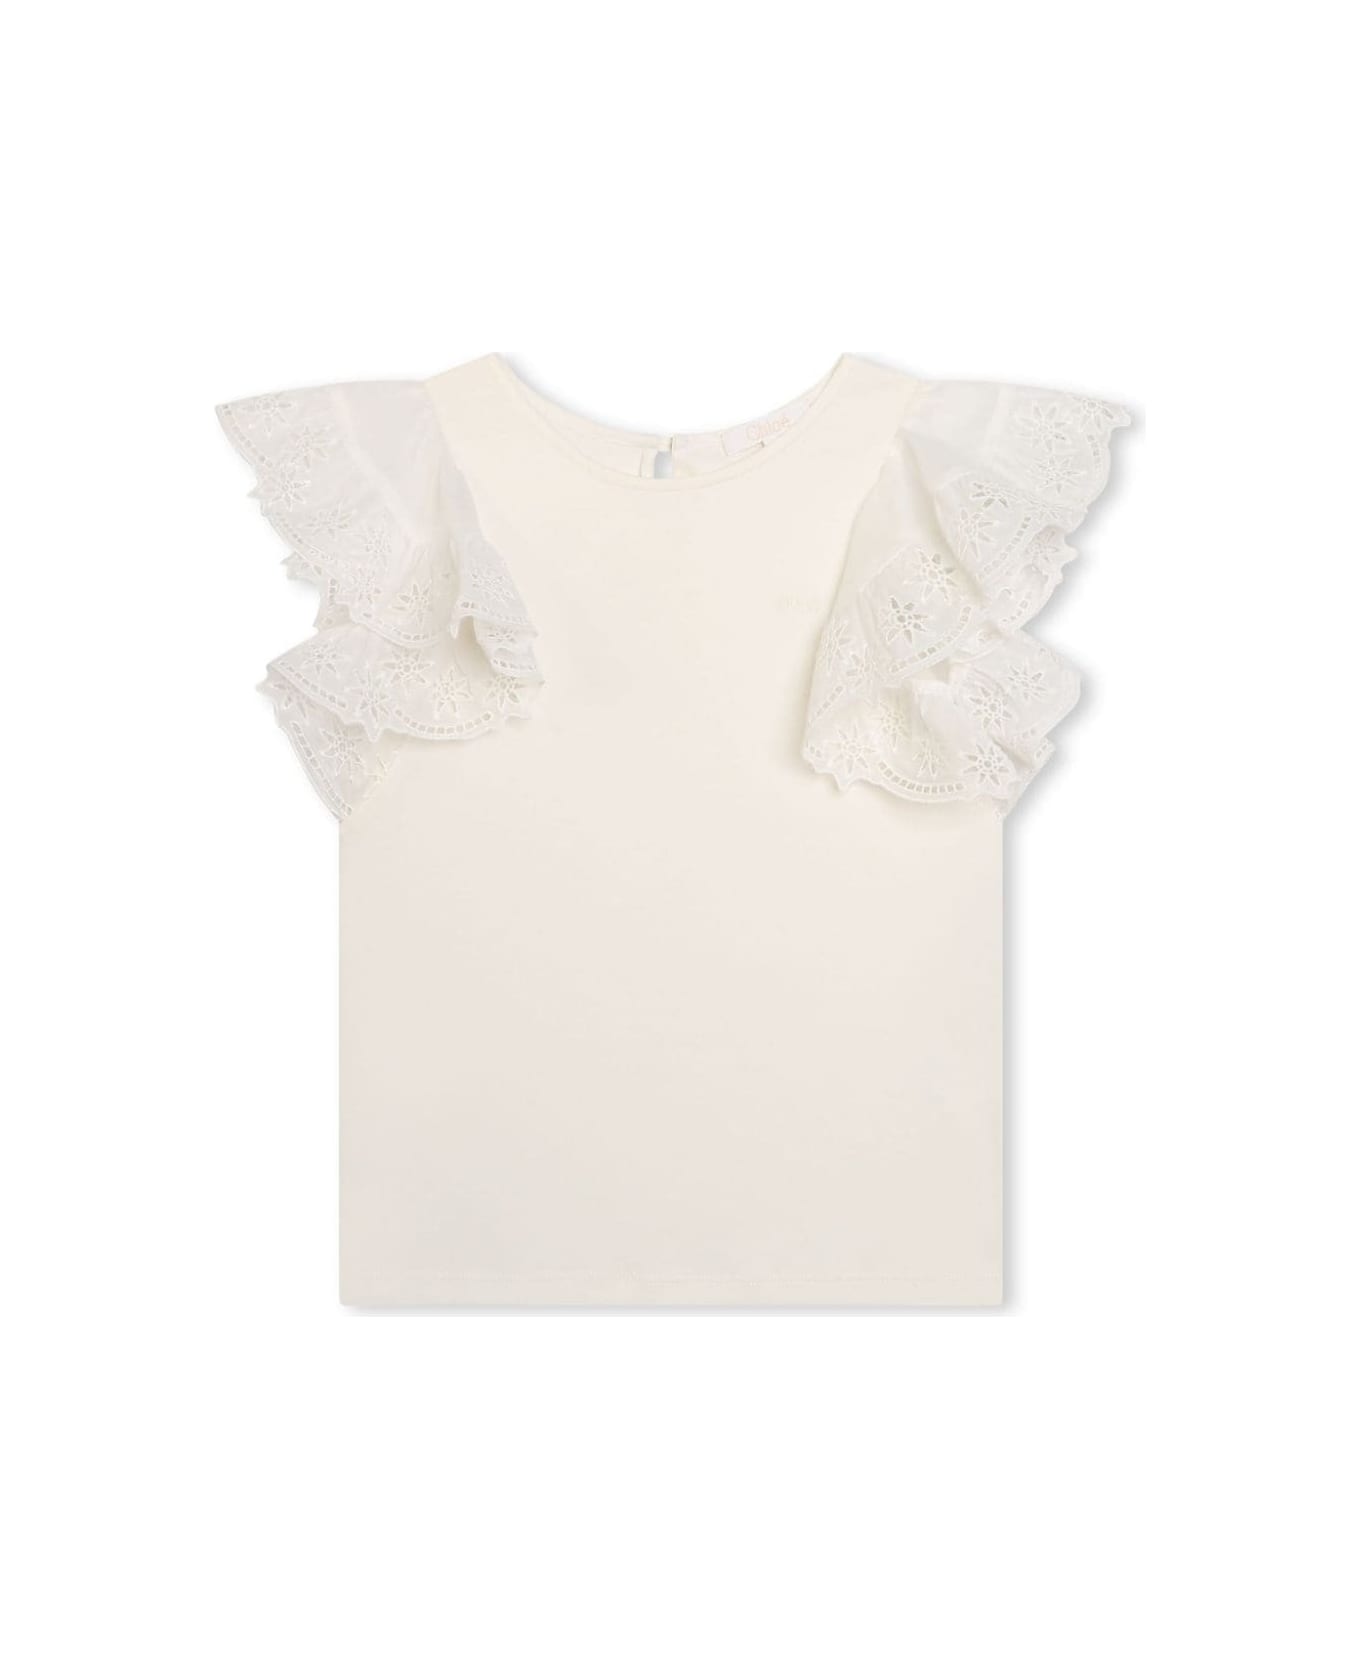 Chloé White Top With Embroidered Ruffles - Bianco